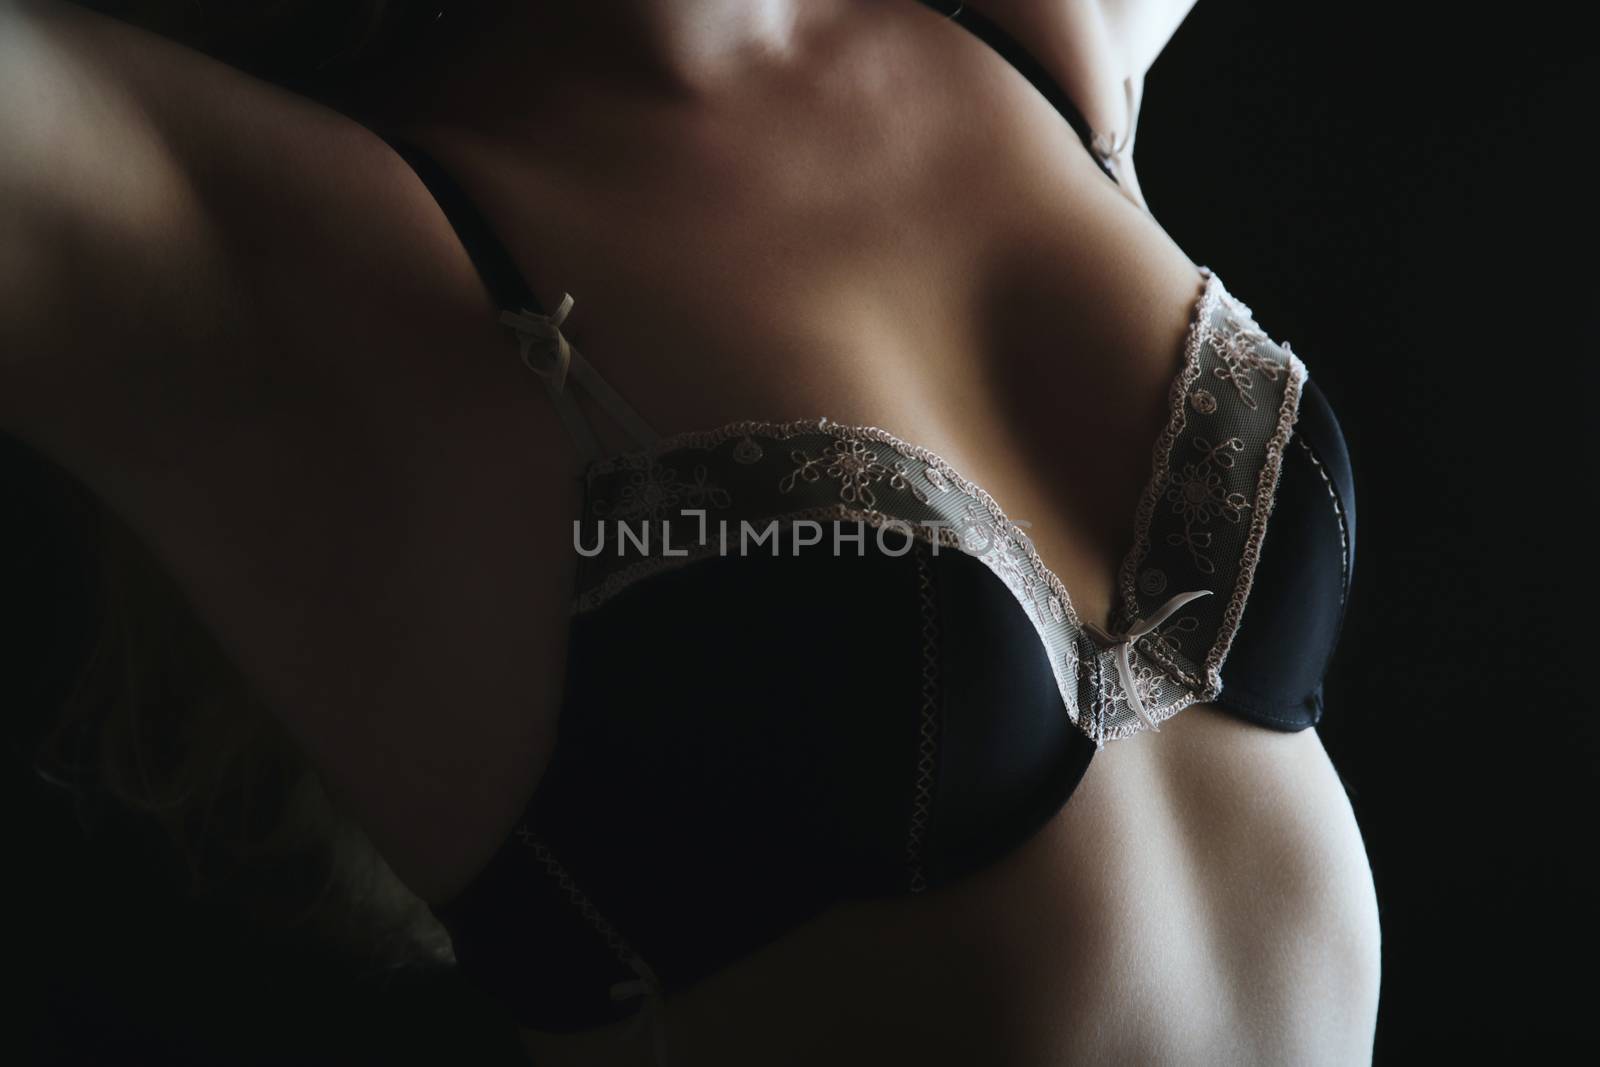 female breast with bra by Olli1973